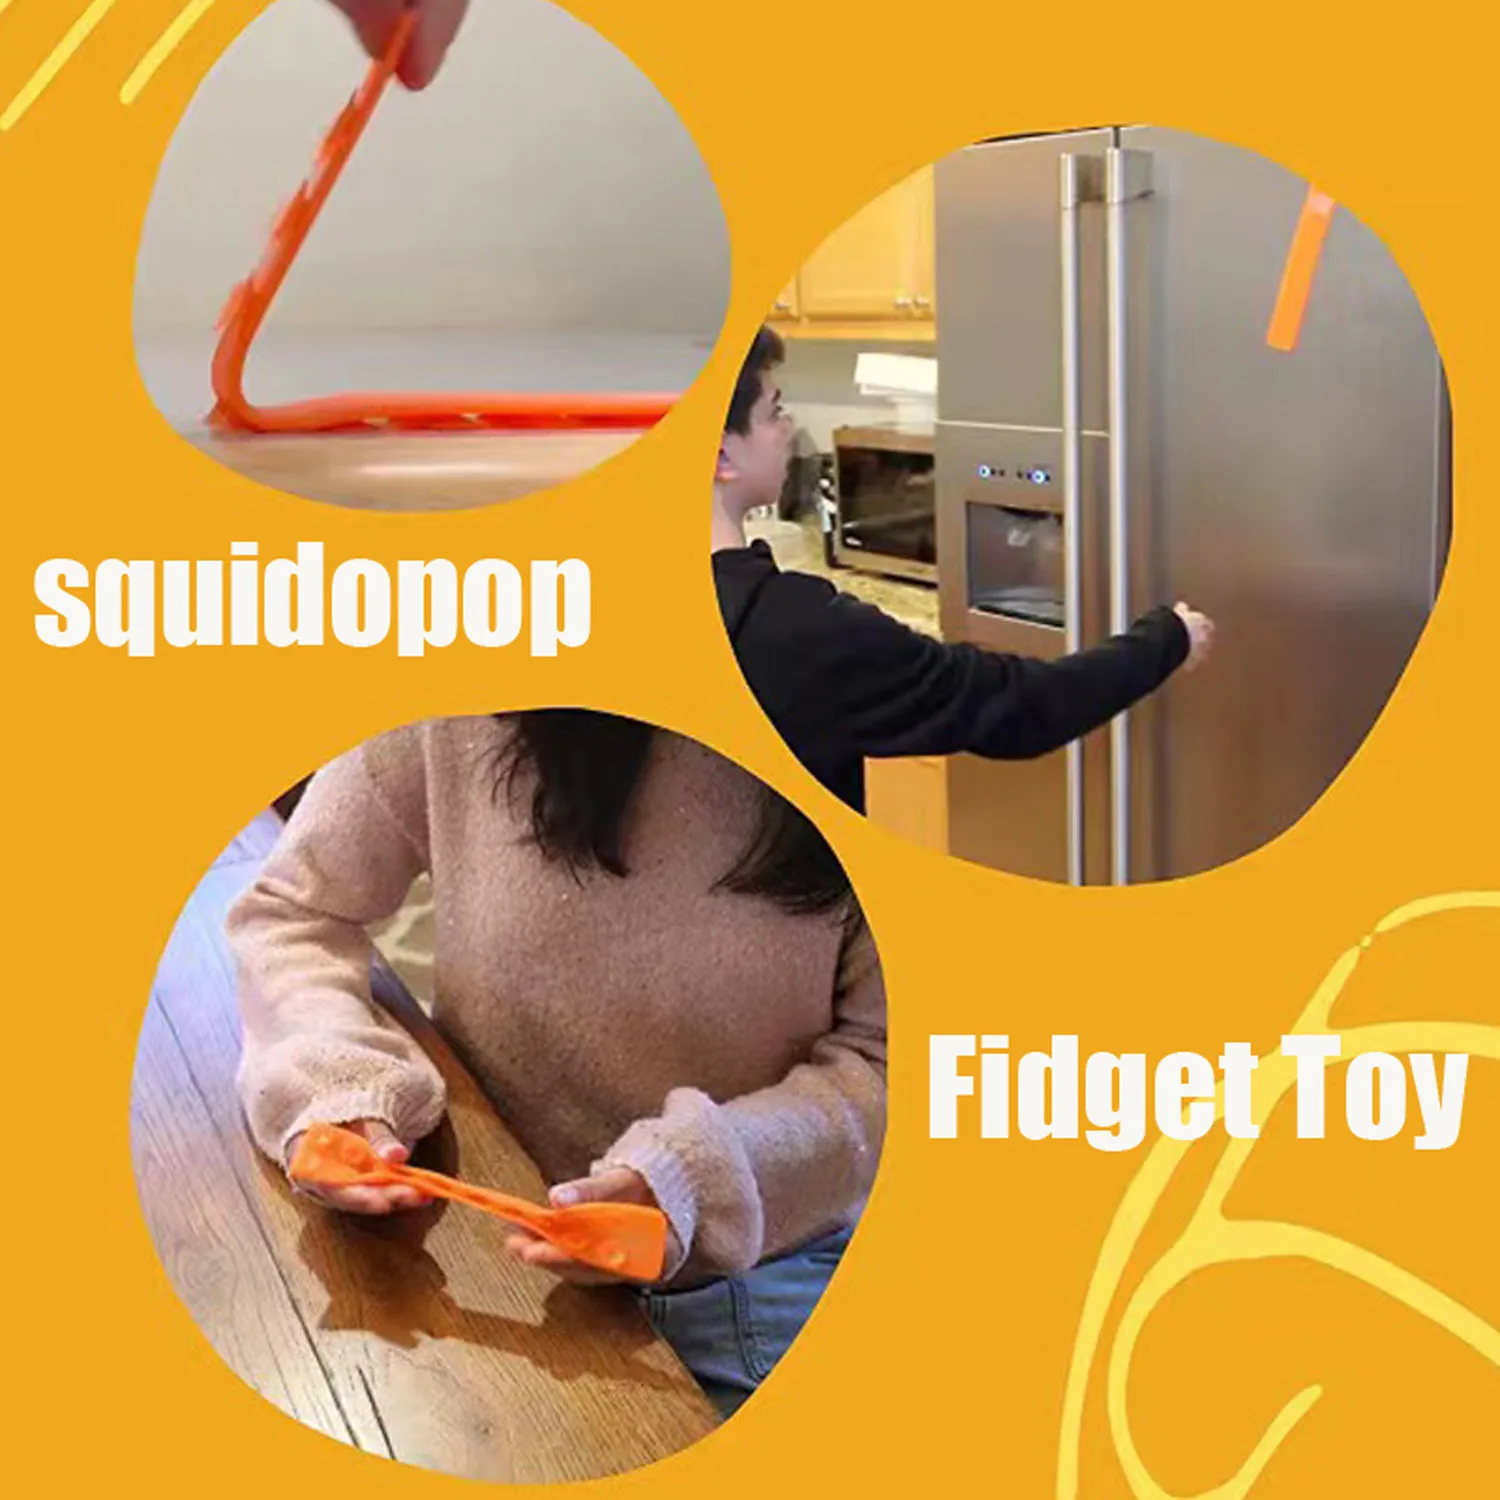 snapper fidget toy Suction Cup Square Pat Pat Silicone Sheet Squidopop Fidget Toy Children Stress Relief Squeeze Toy Antistress Soft Squishy toy1 fidget snapper